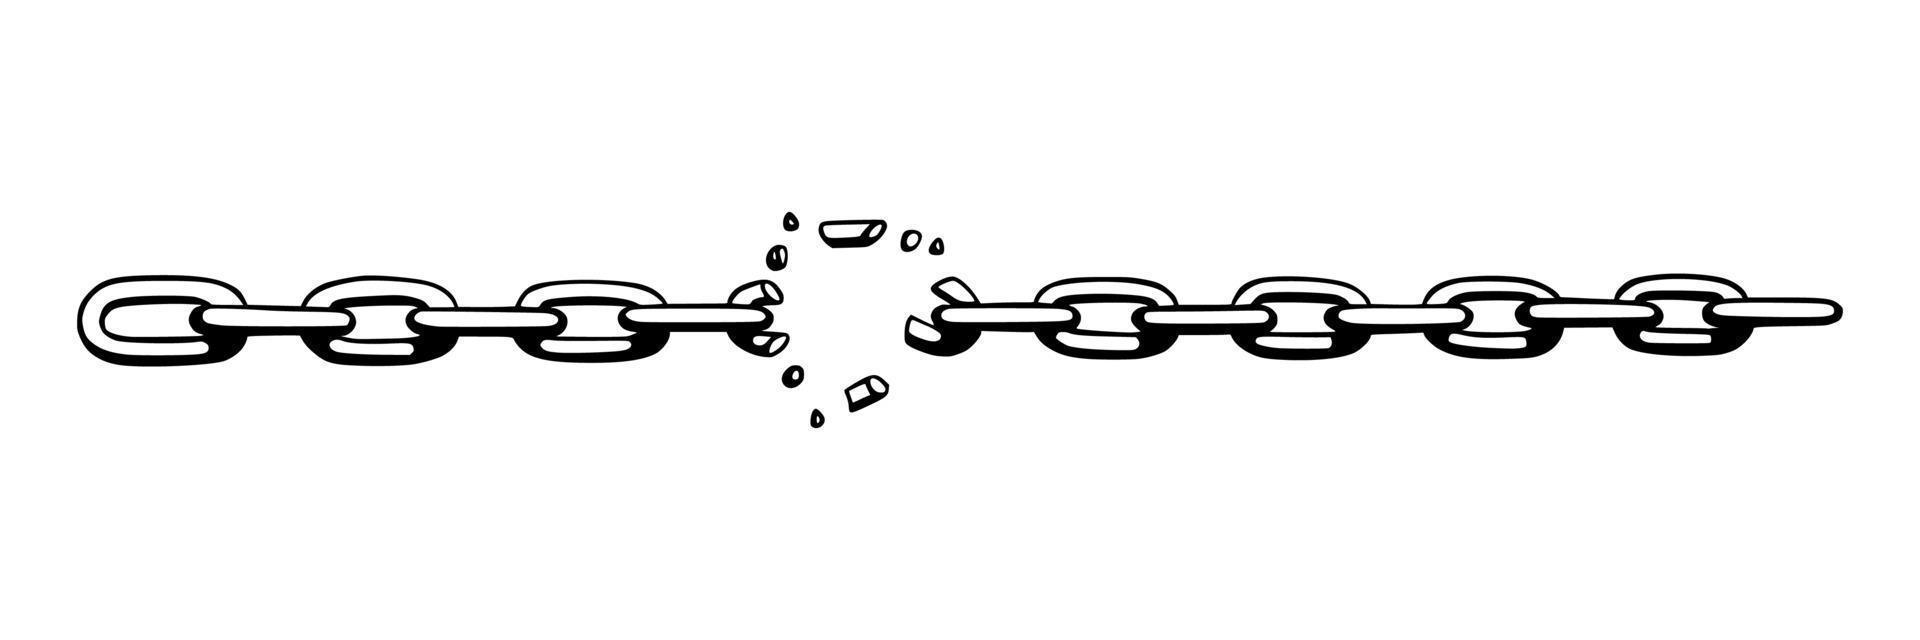 Broken chain with shatters as symbol of strength and freedom. Sketch of metal chains. Vector illustration